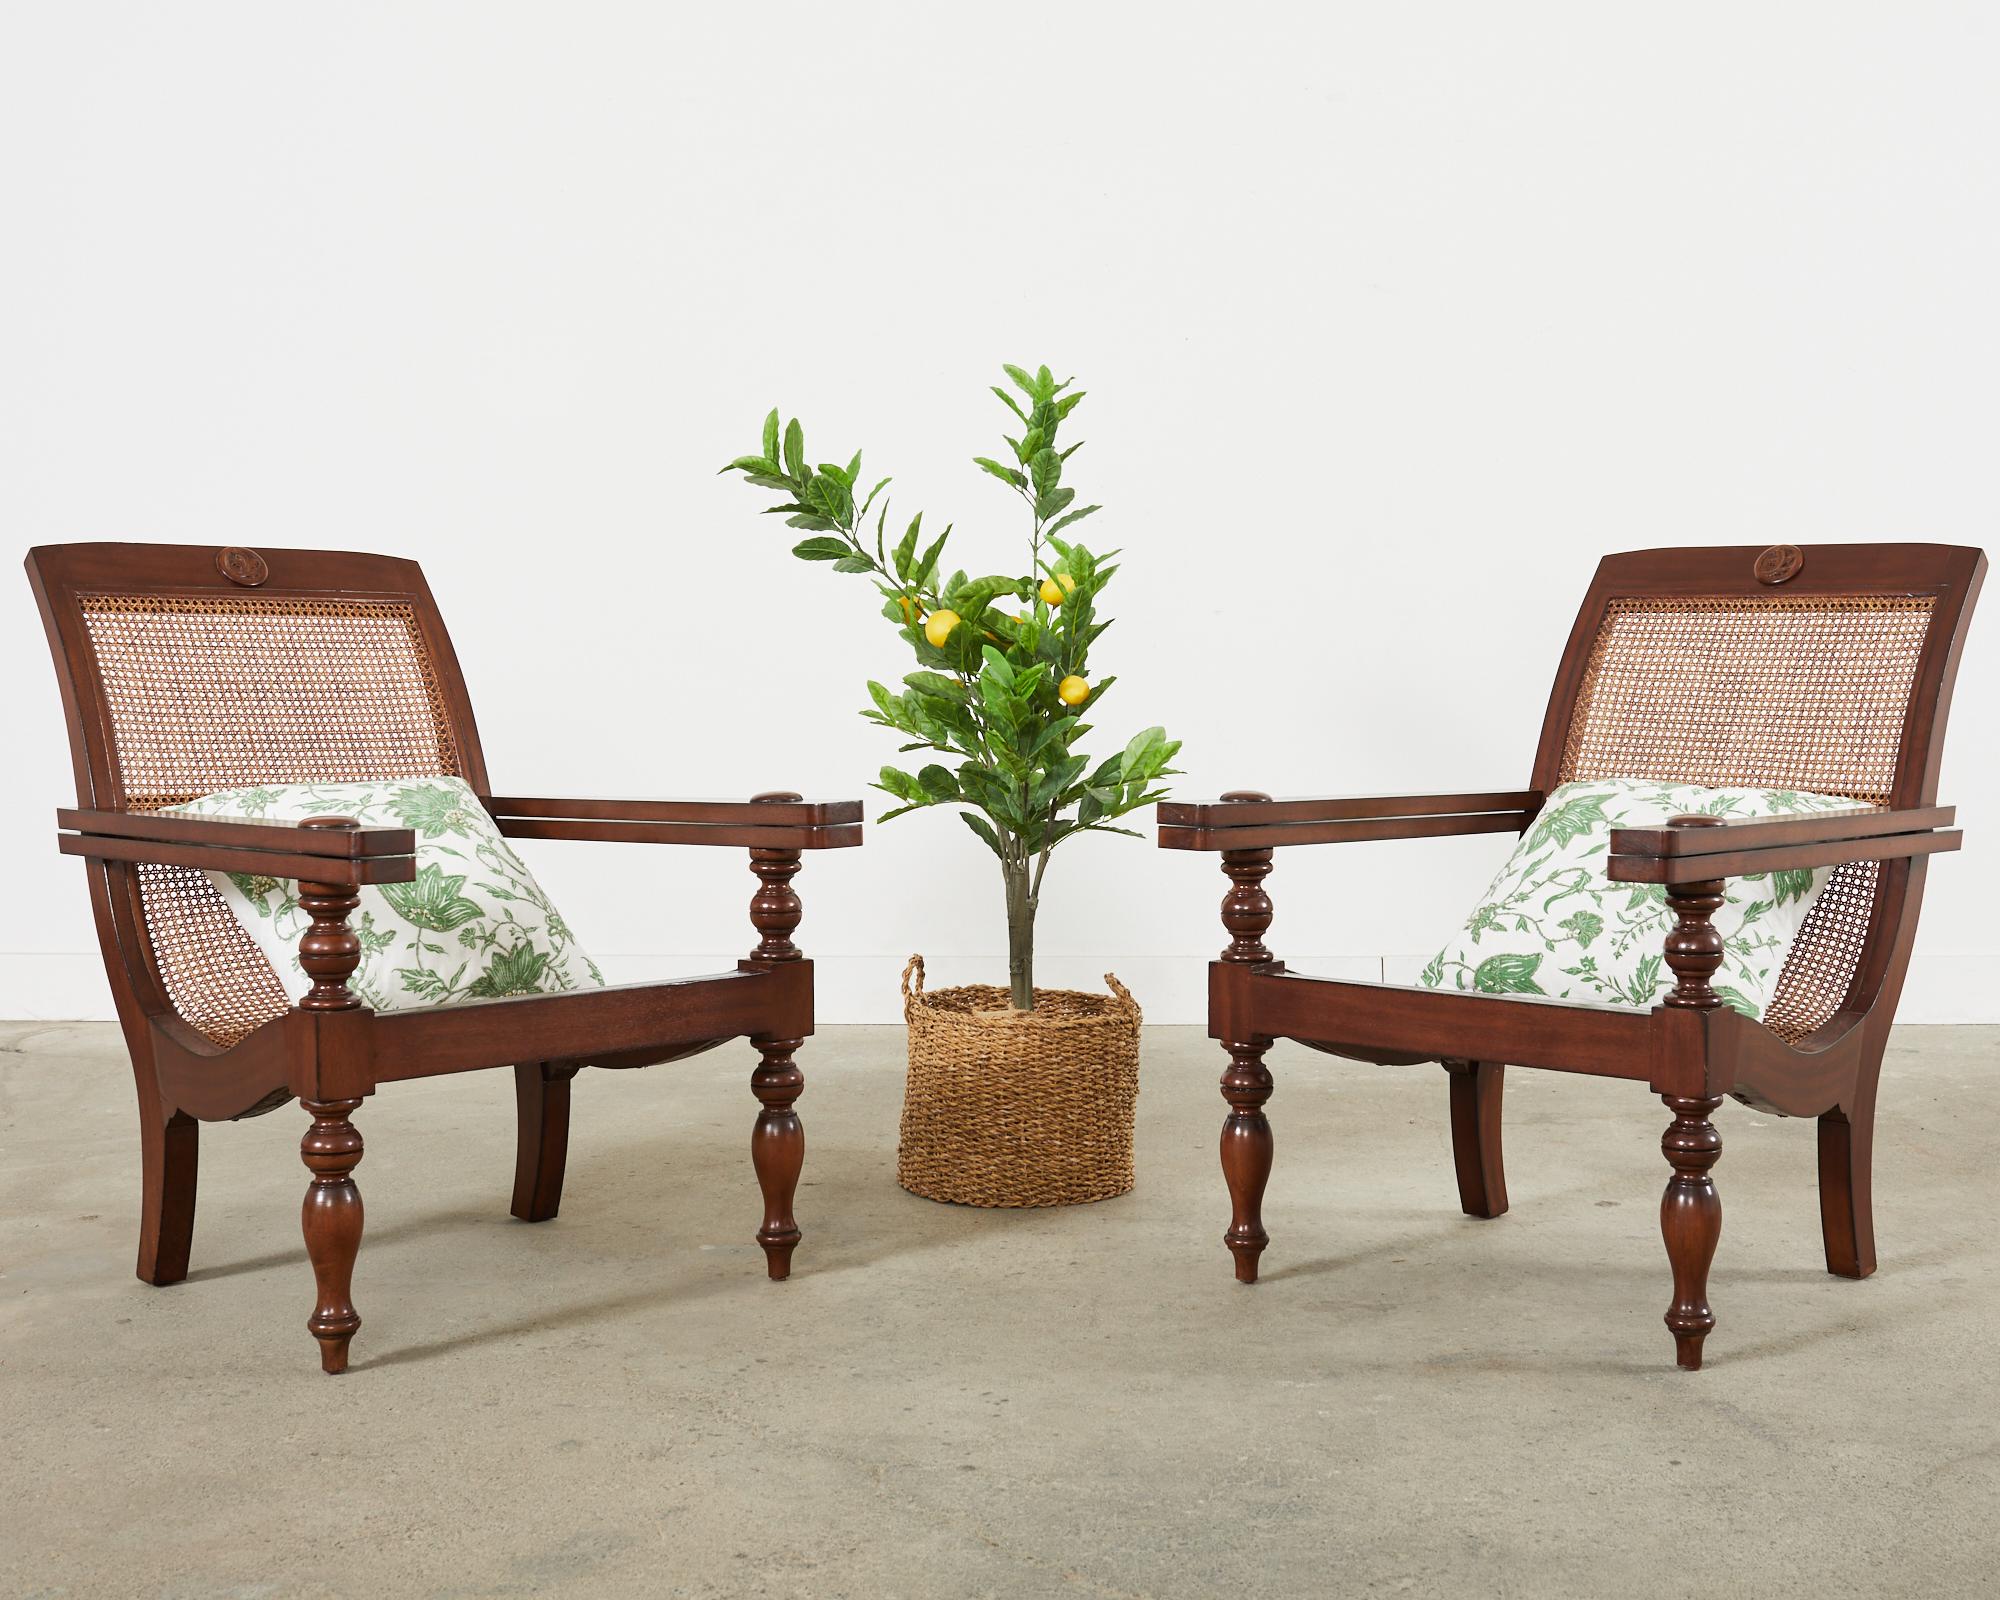 Gorgeous pair of plantation lounge chairs crafted from mahogany in the Dutch colonial manner. The chairs feature an oversized frame inset with woven cane. The gracefully curved frame has long, wide flat arms with extensions for resting the legs. The